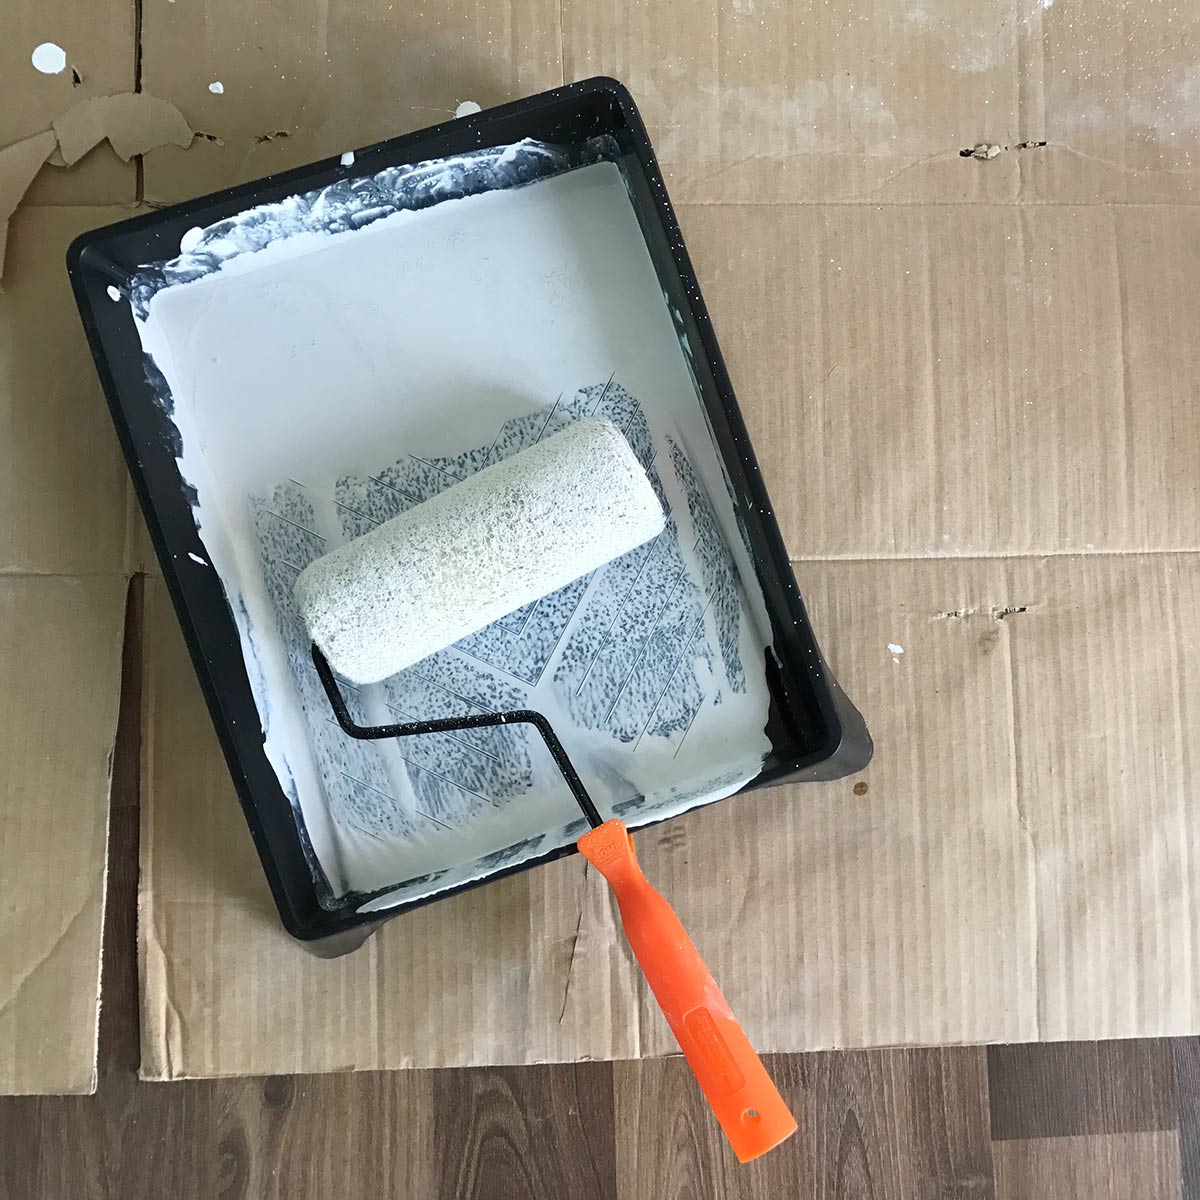 How to clean paint roller after painting
the walls